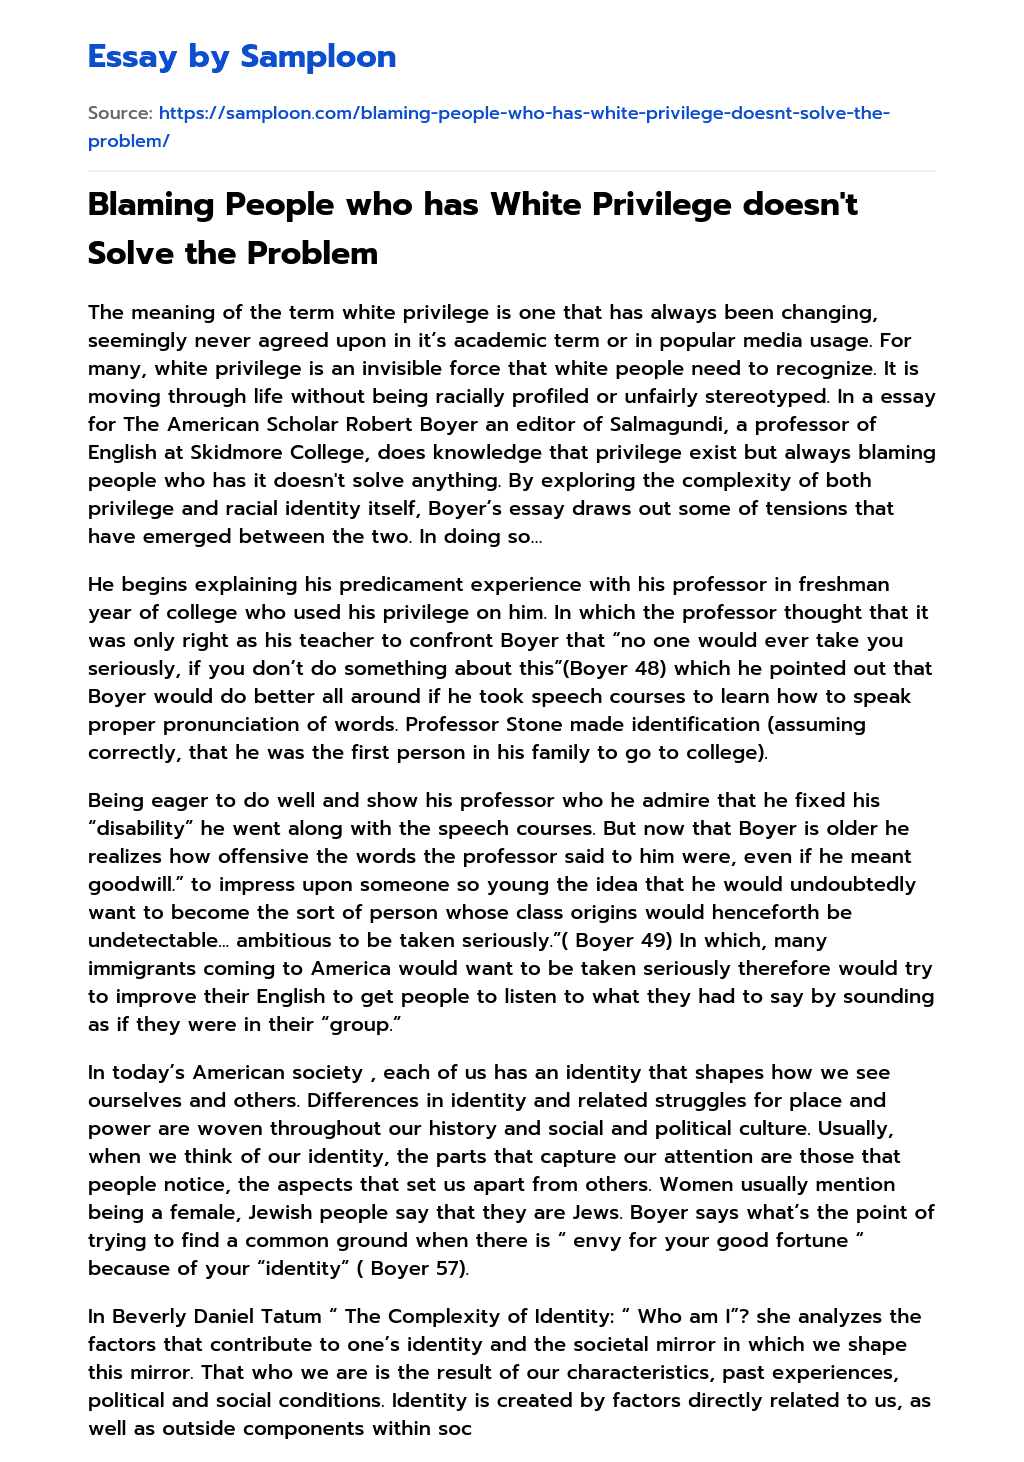 Blaming People who has White Privilege doesn’t Solve the Problem essay